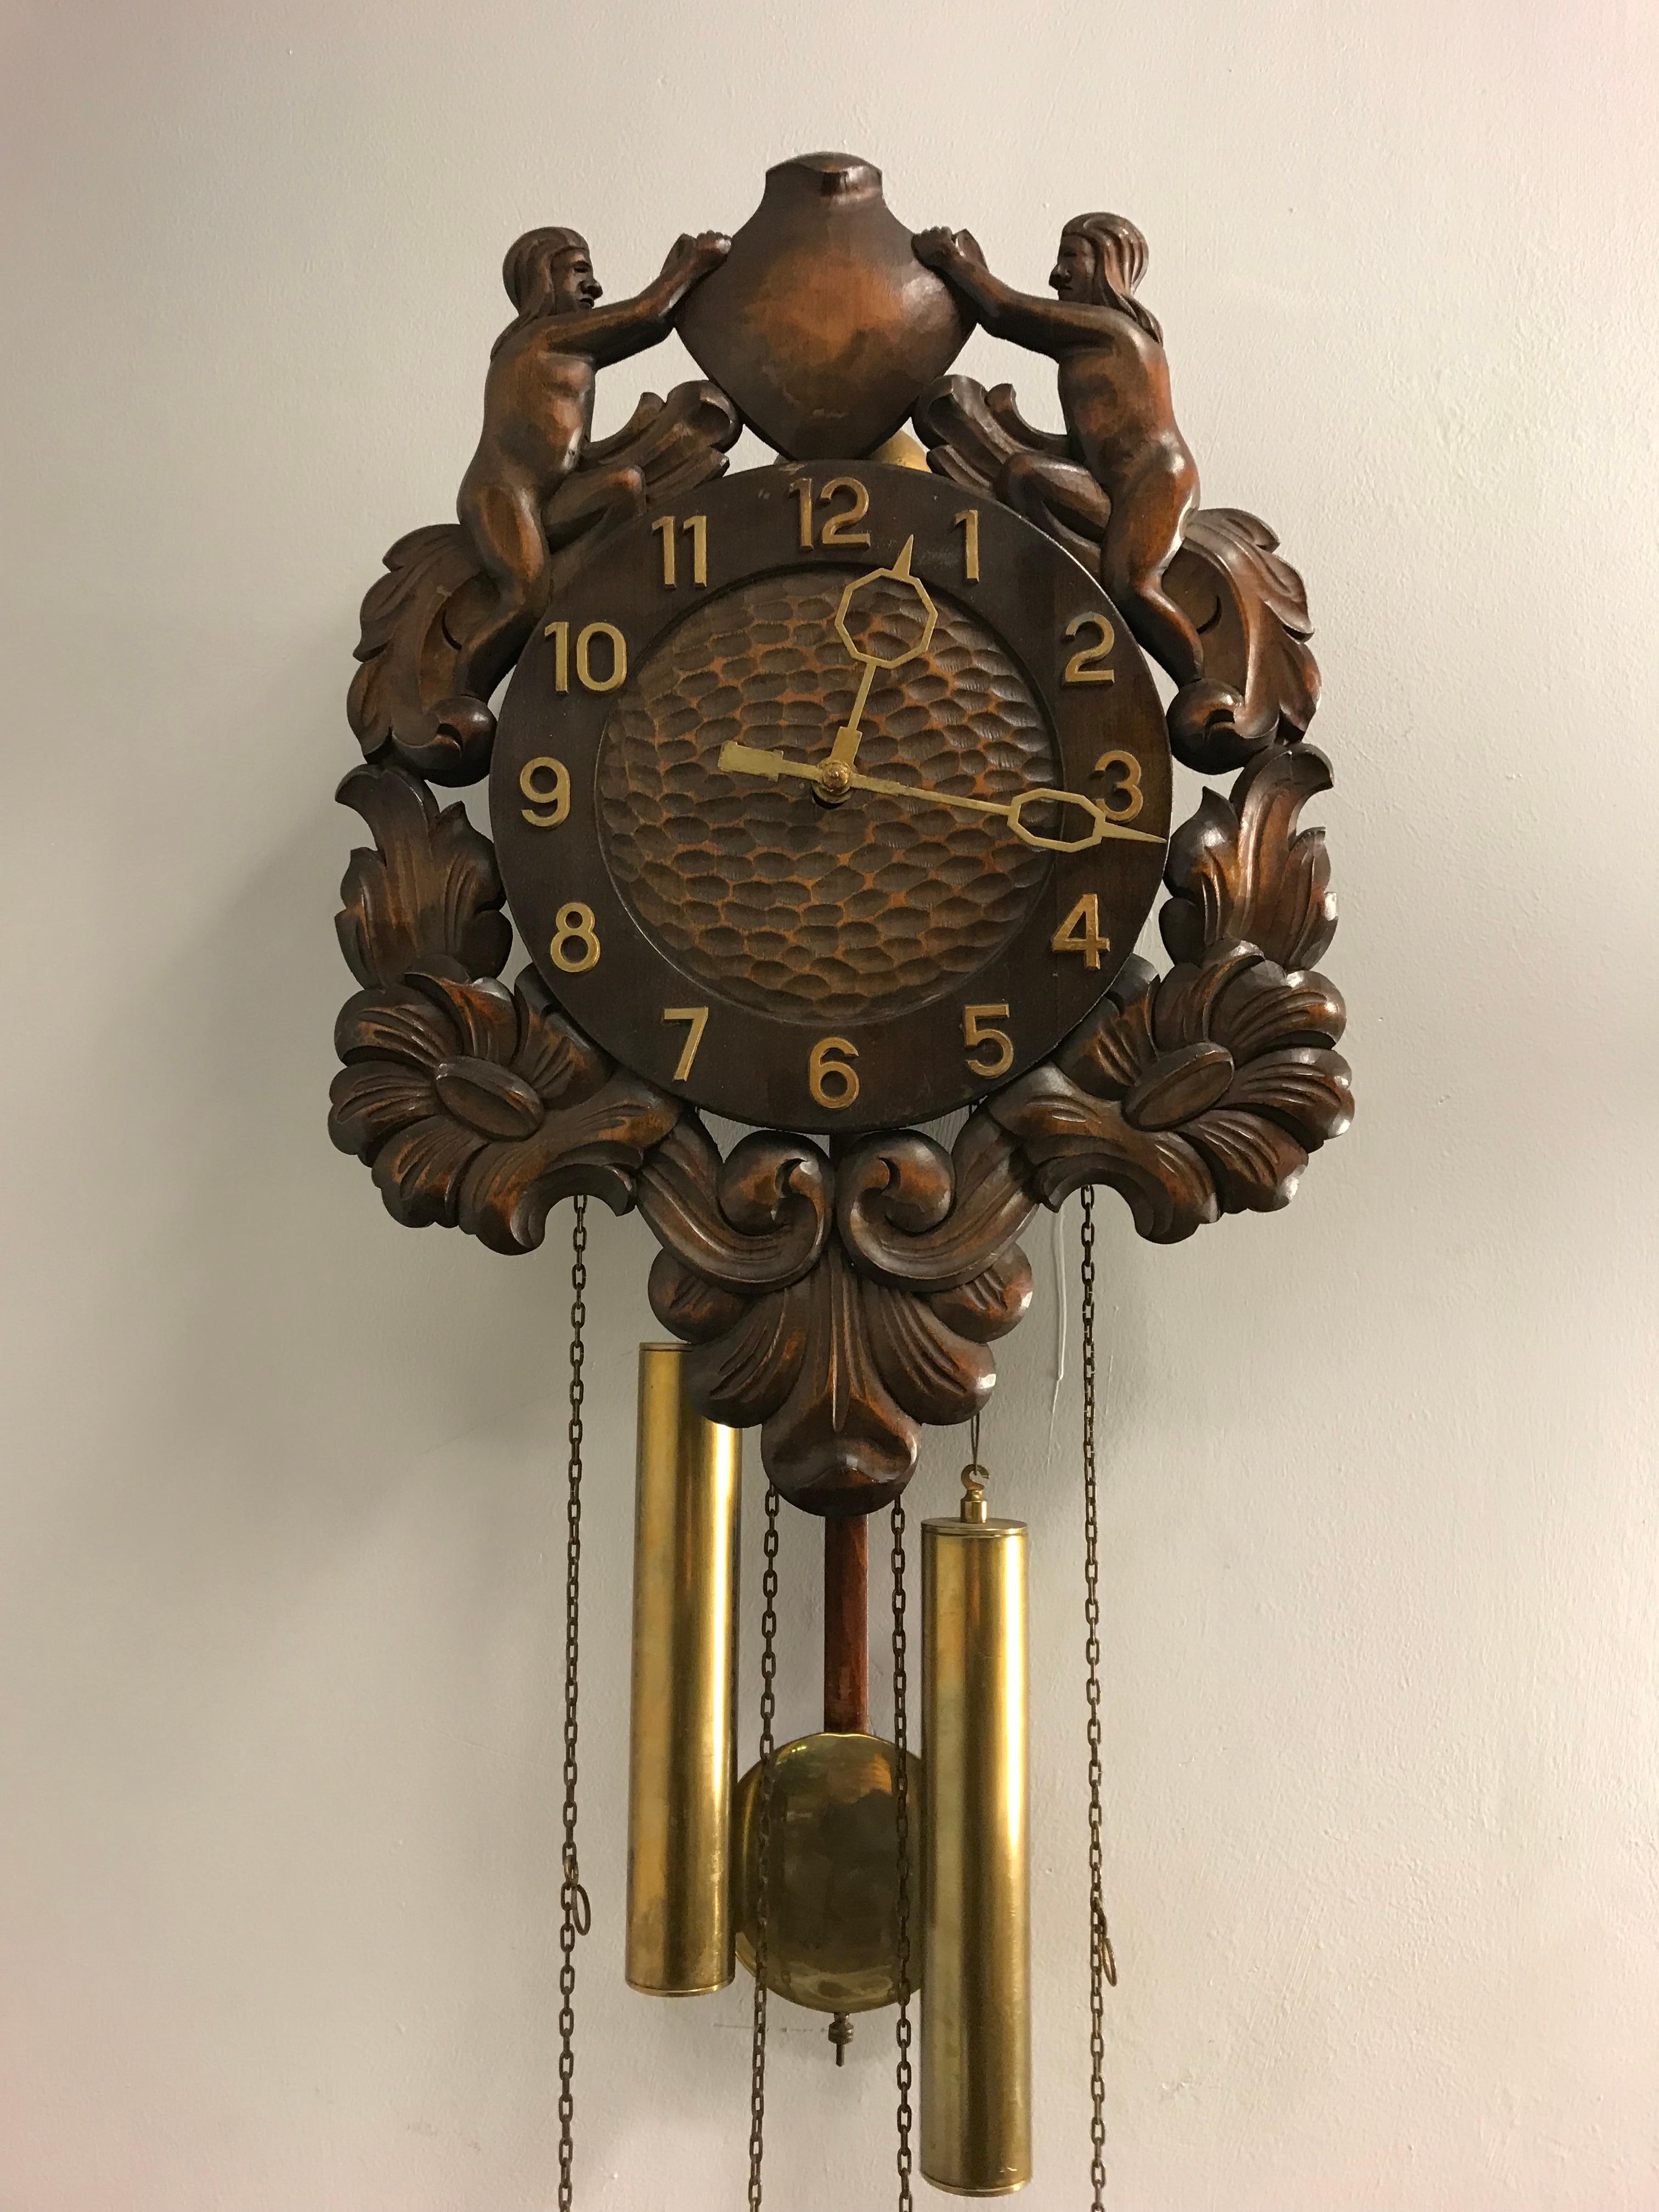 Unique Denmark Made Classical Roman Wall Clock with Sculptures and Flowers For Sale 3